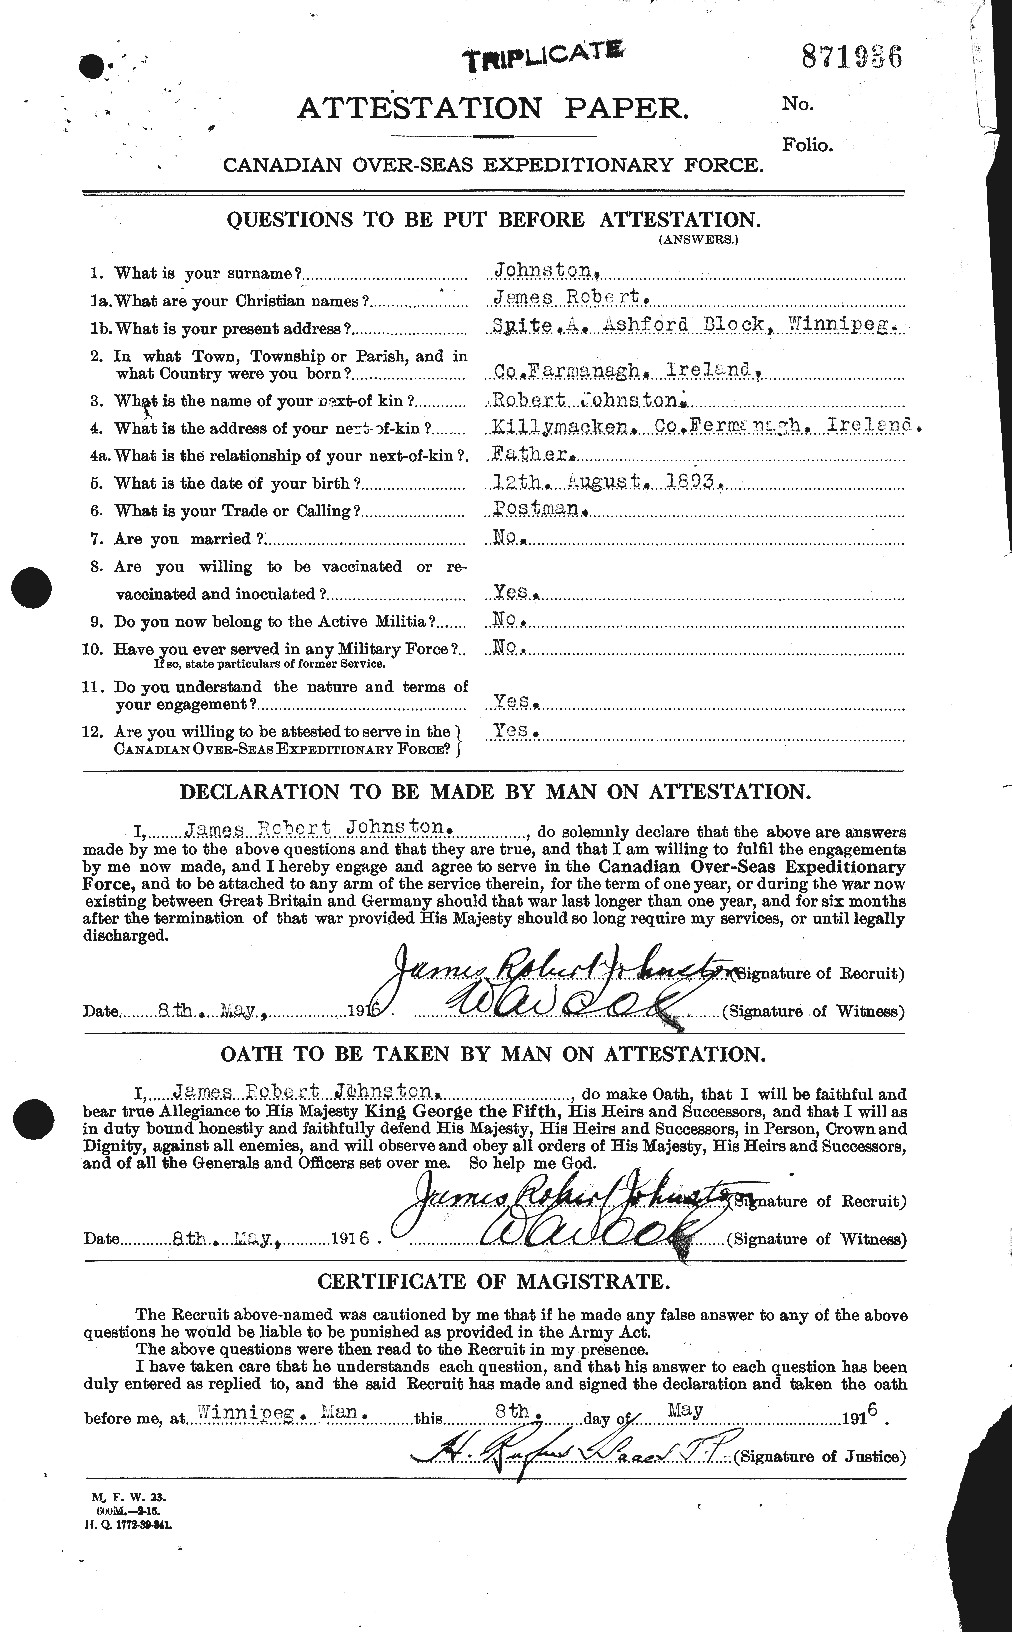 Personnel Records of the First World War - CEF 422751a